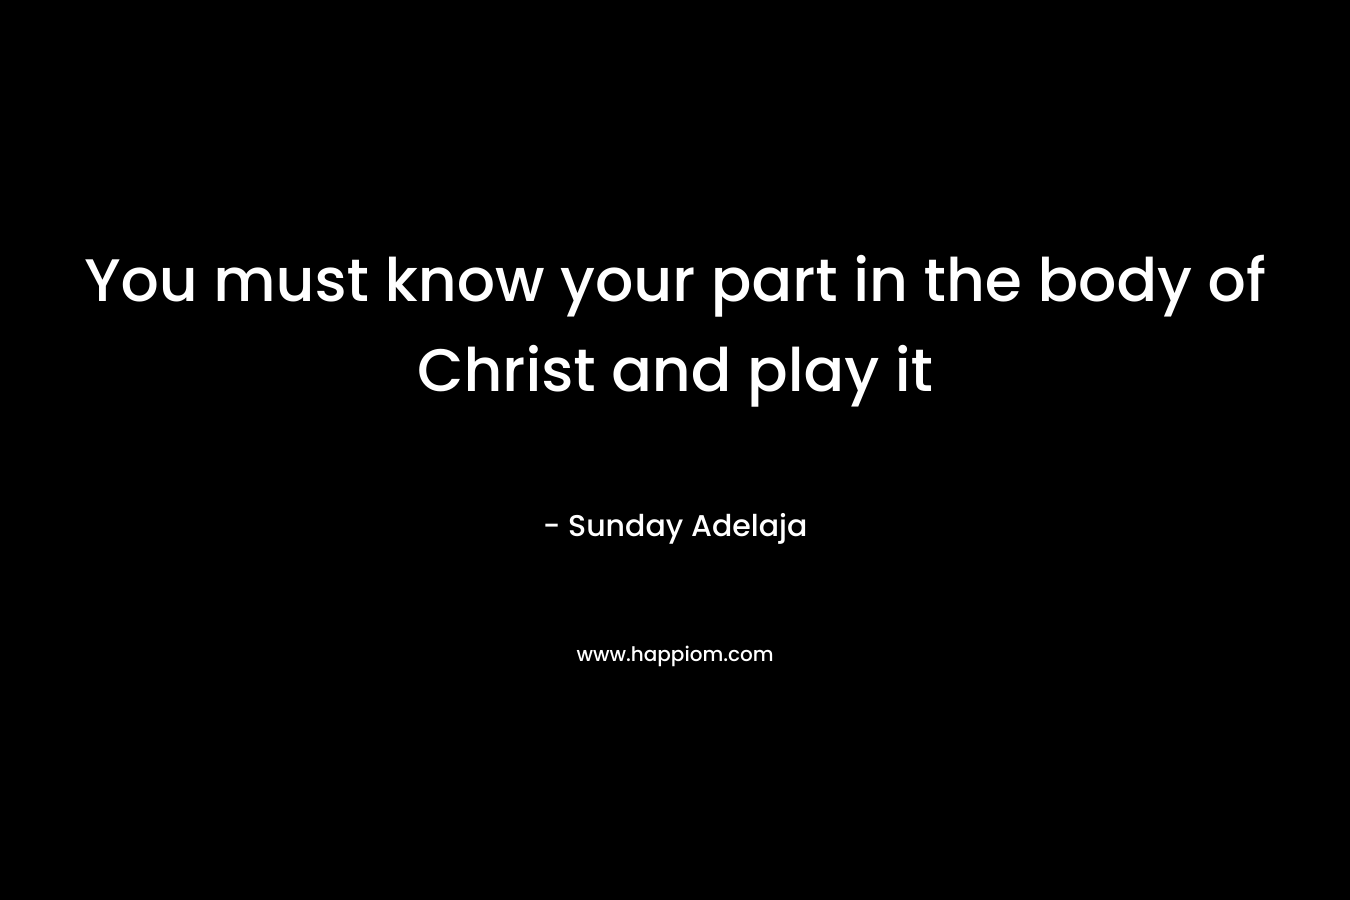 You must know your part in the body of Christ and play it